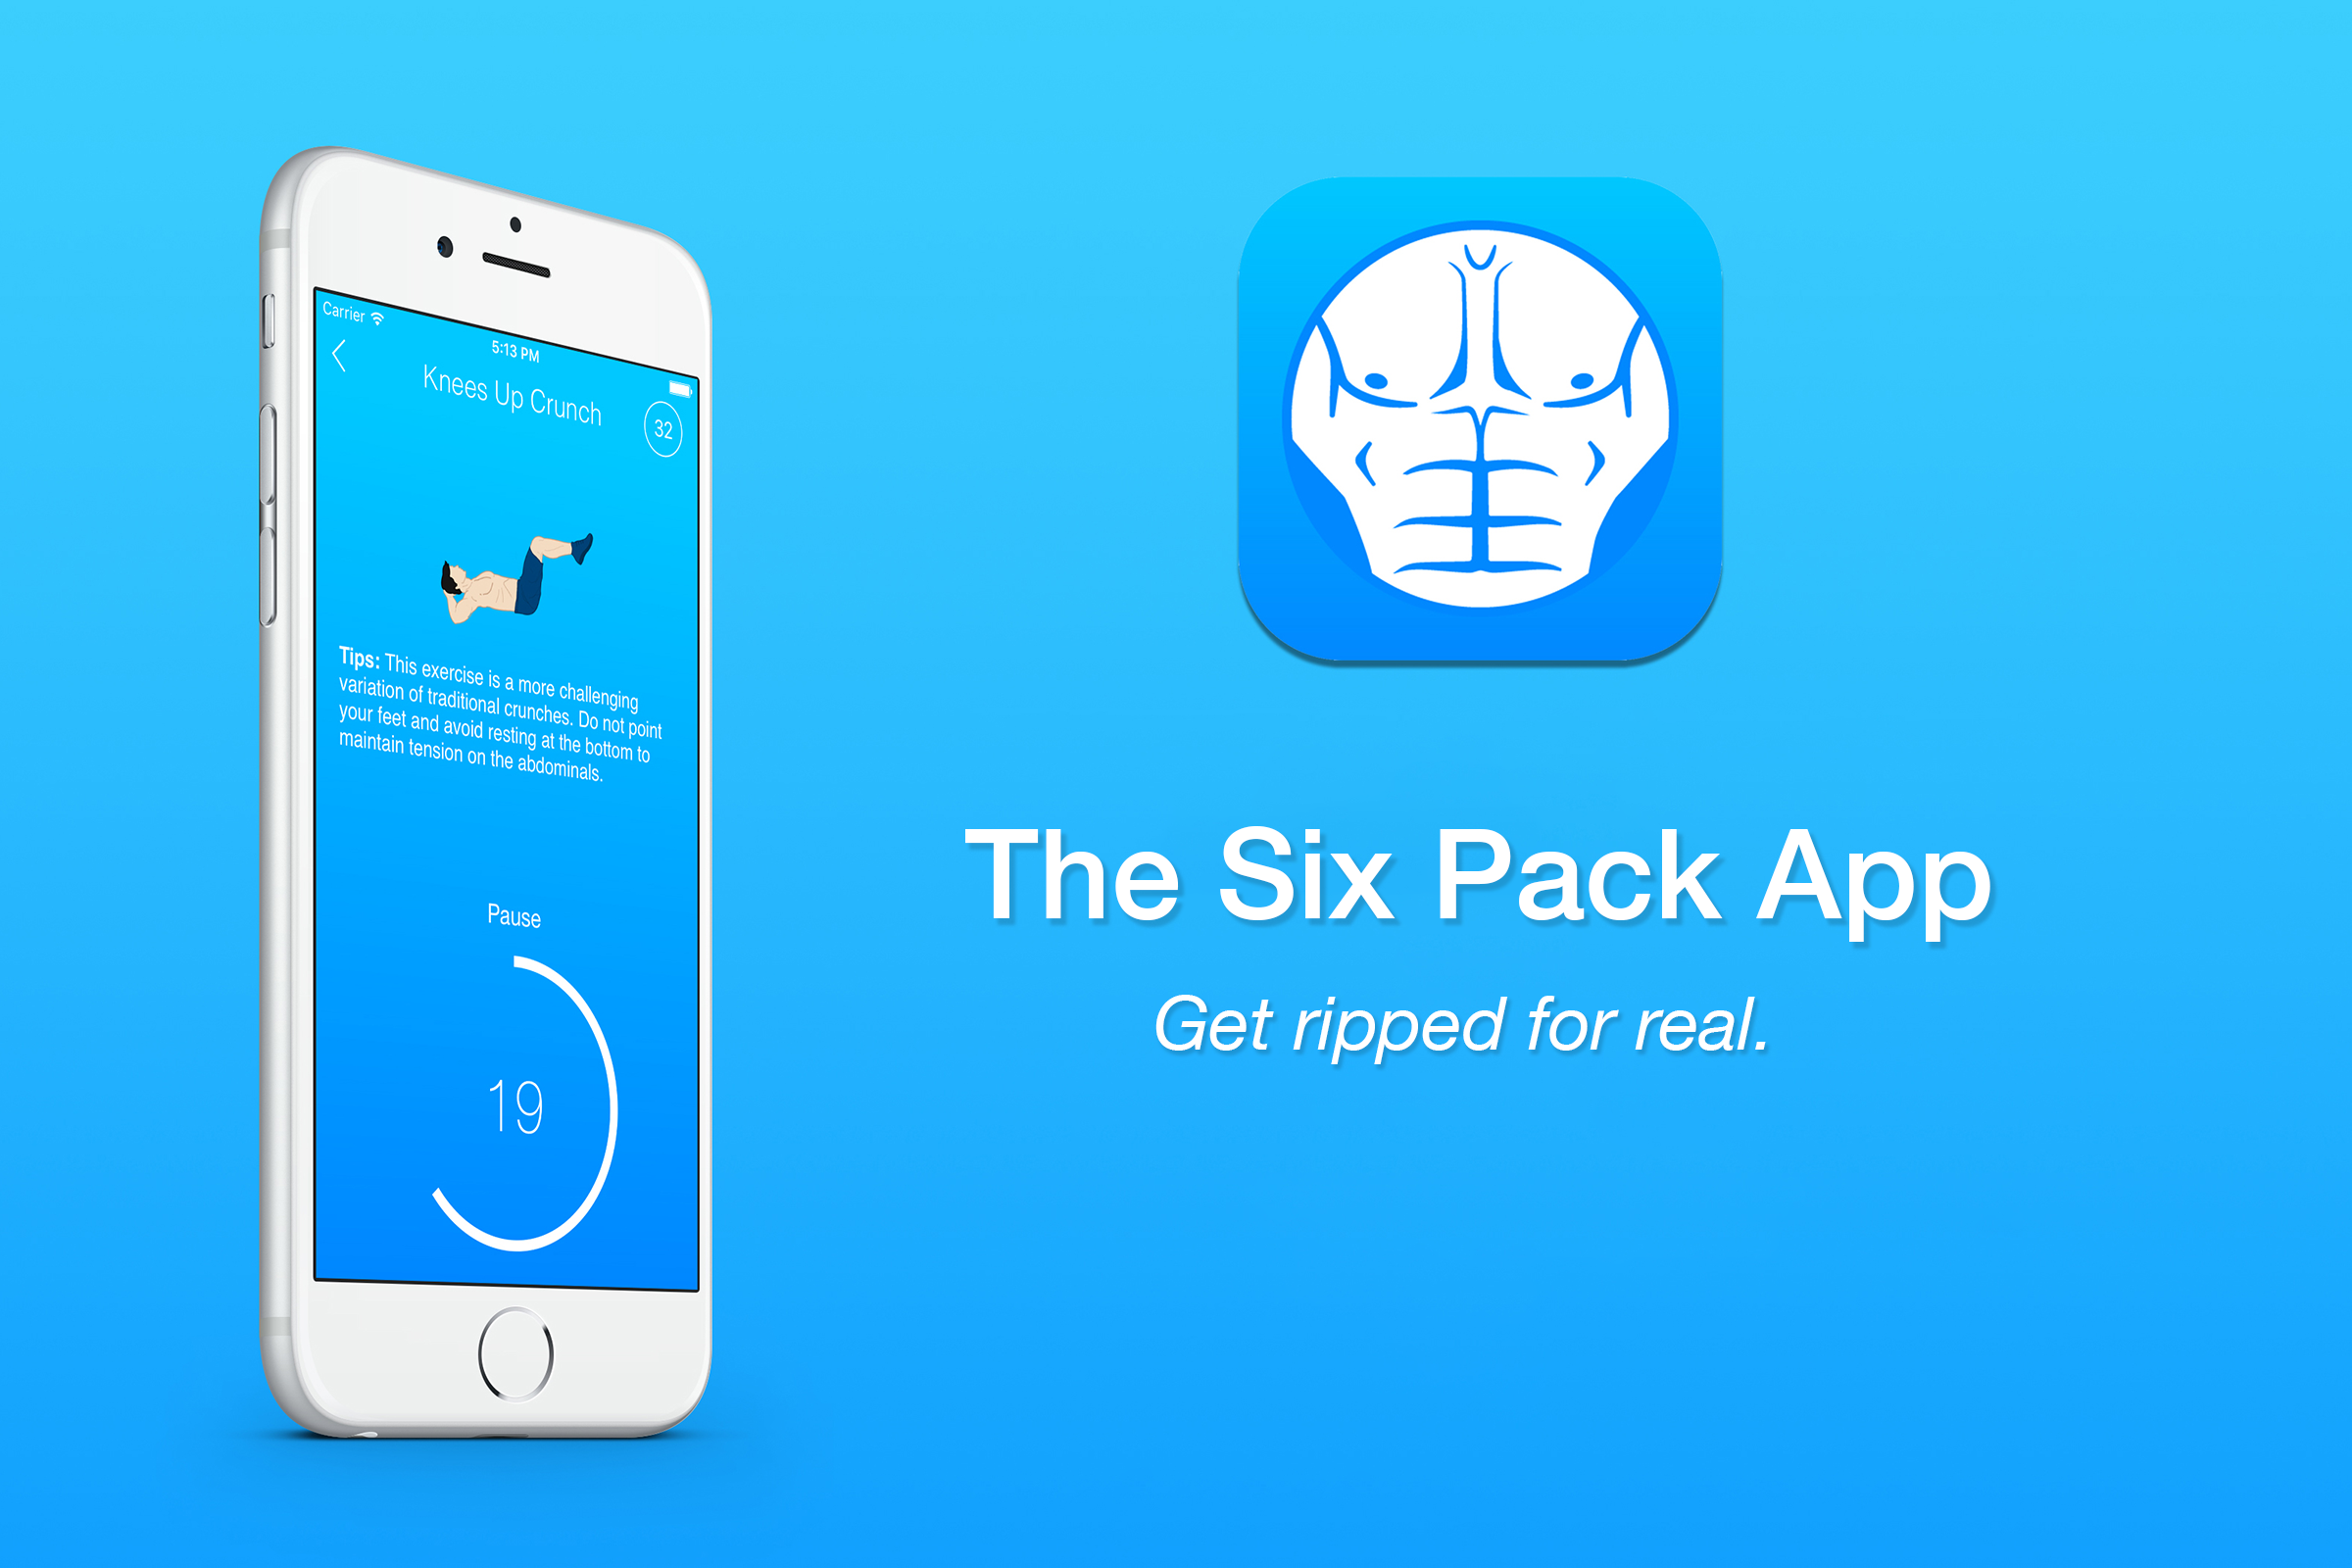 The Six Pack App